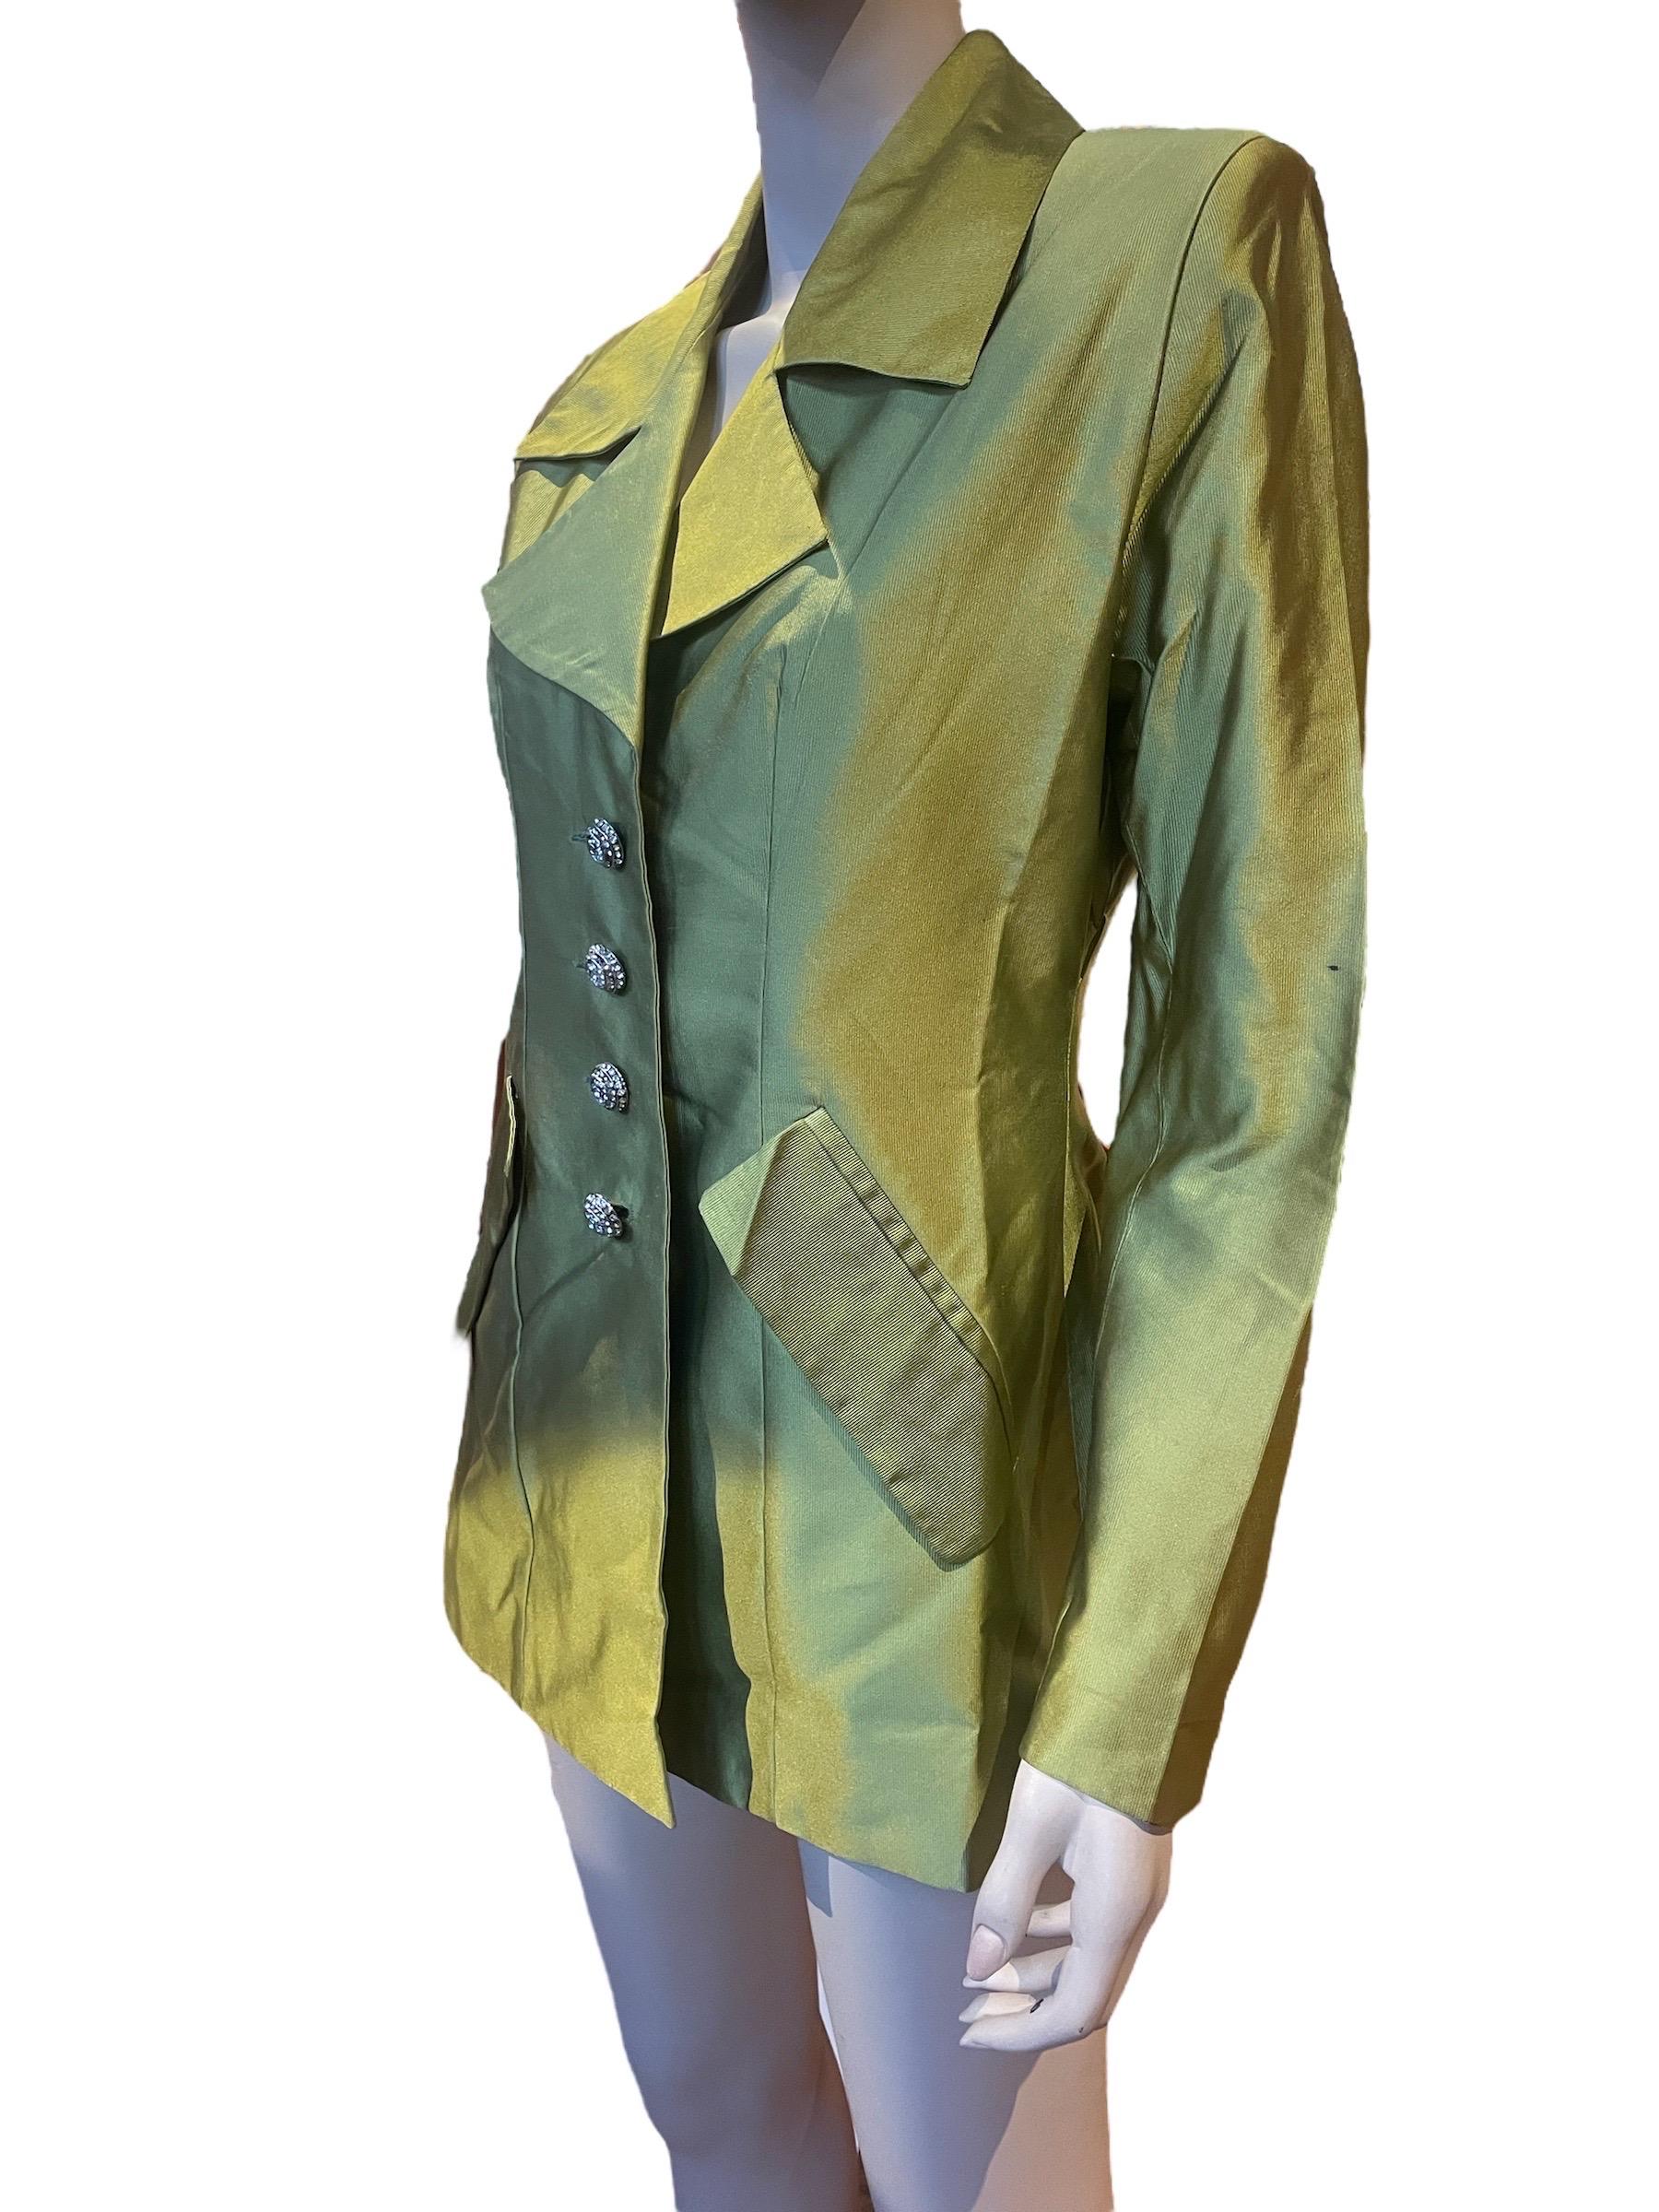 Women's 1990s Todd Oldham Silky Olive Green Blazer with Floral Lining  For Sale